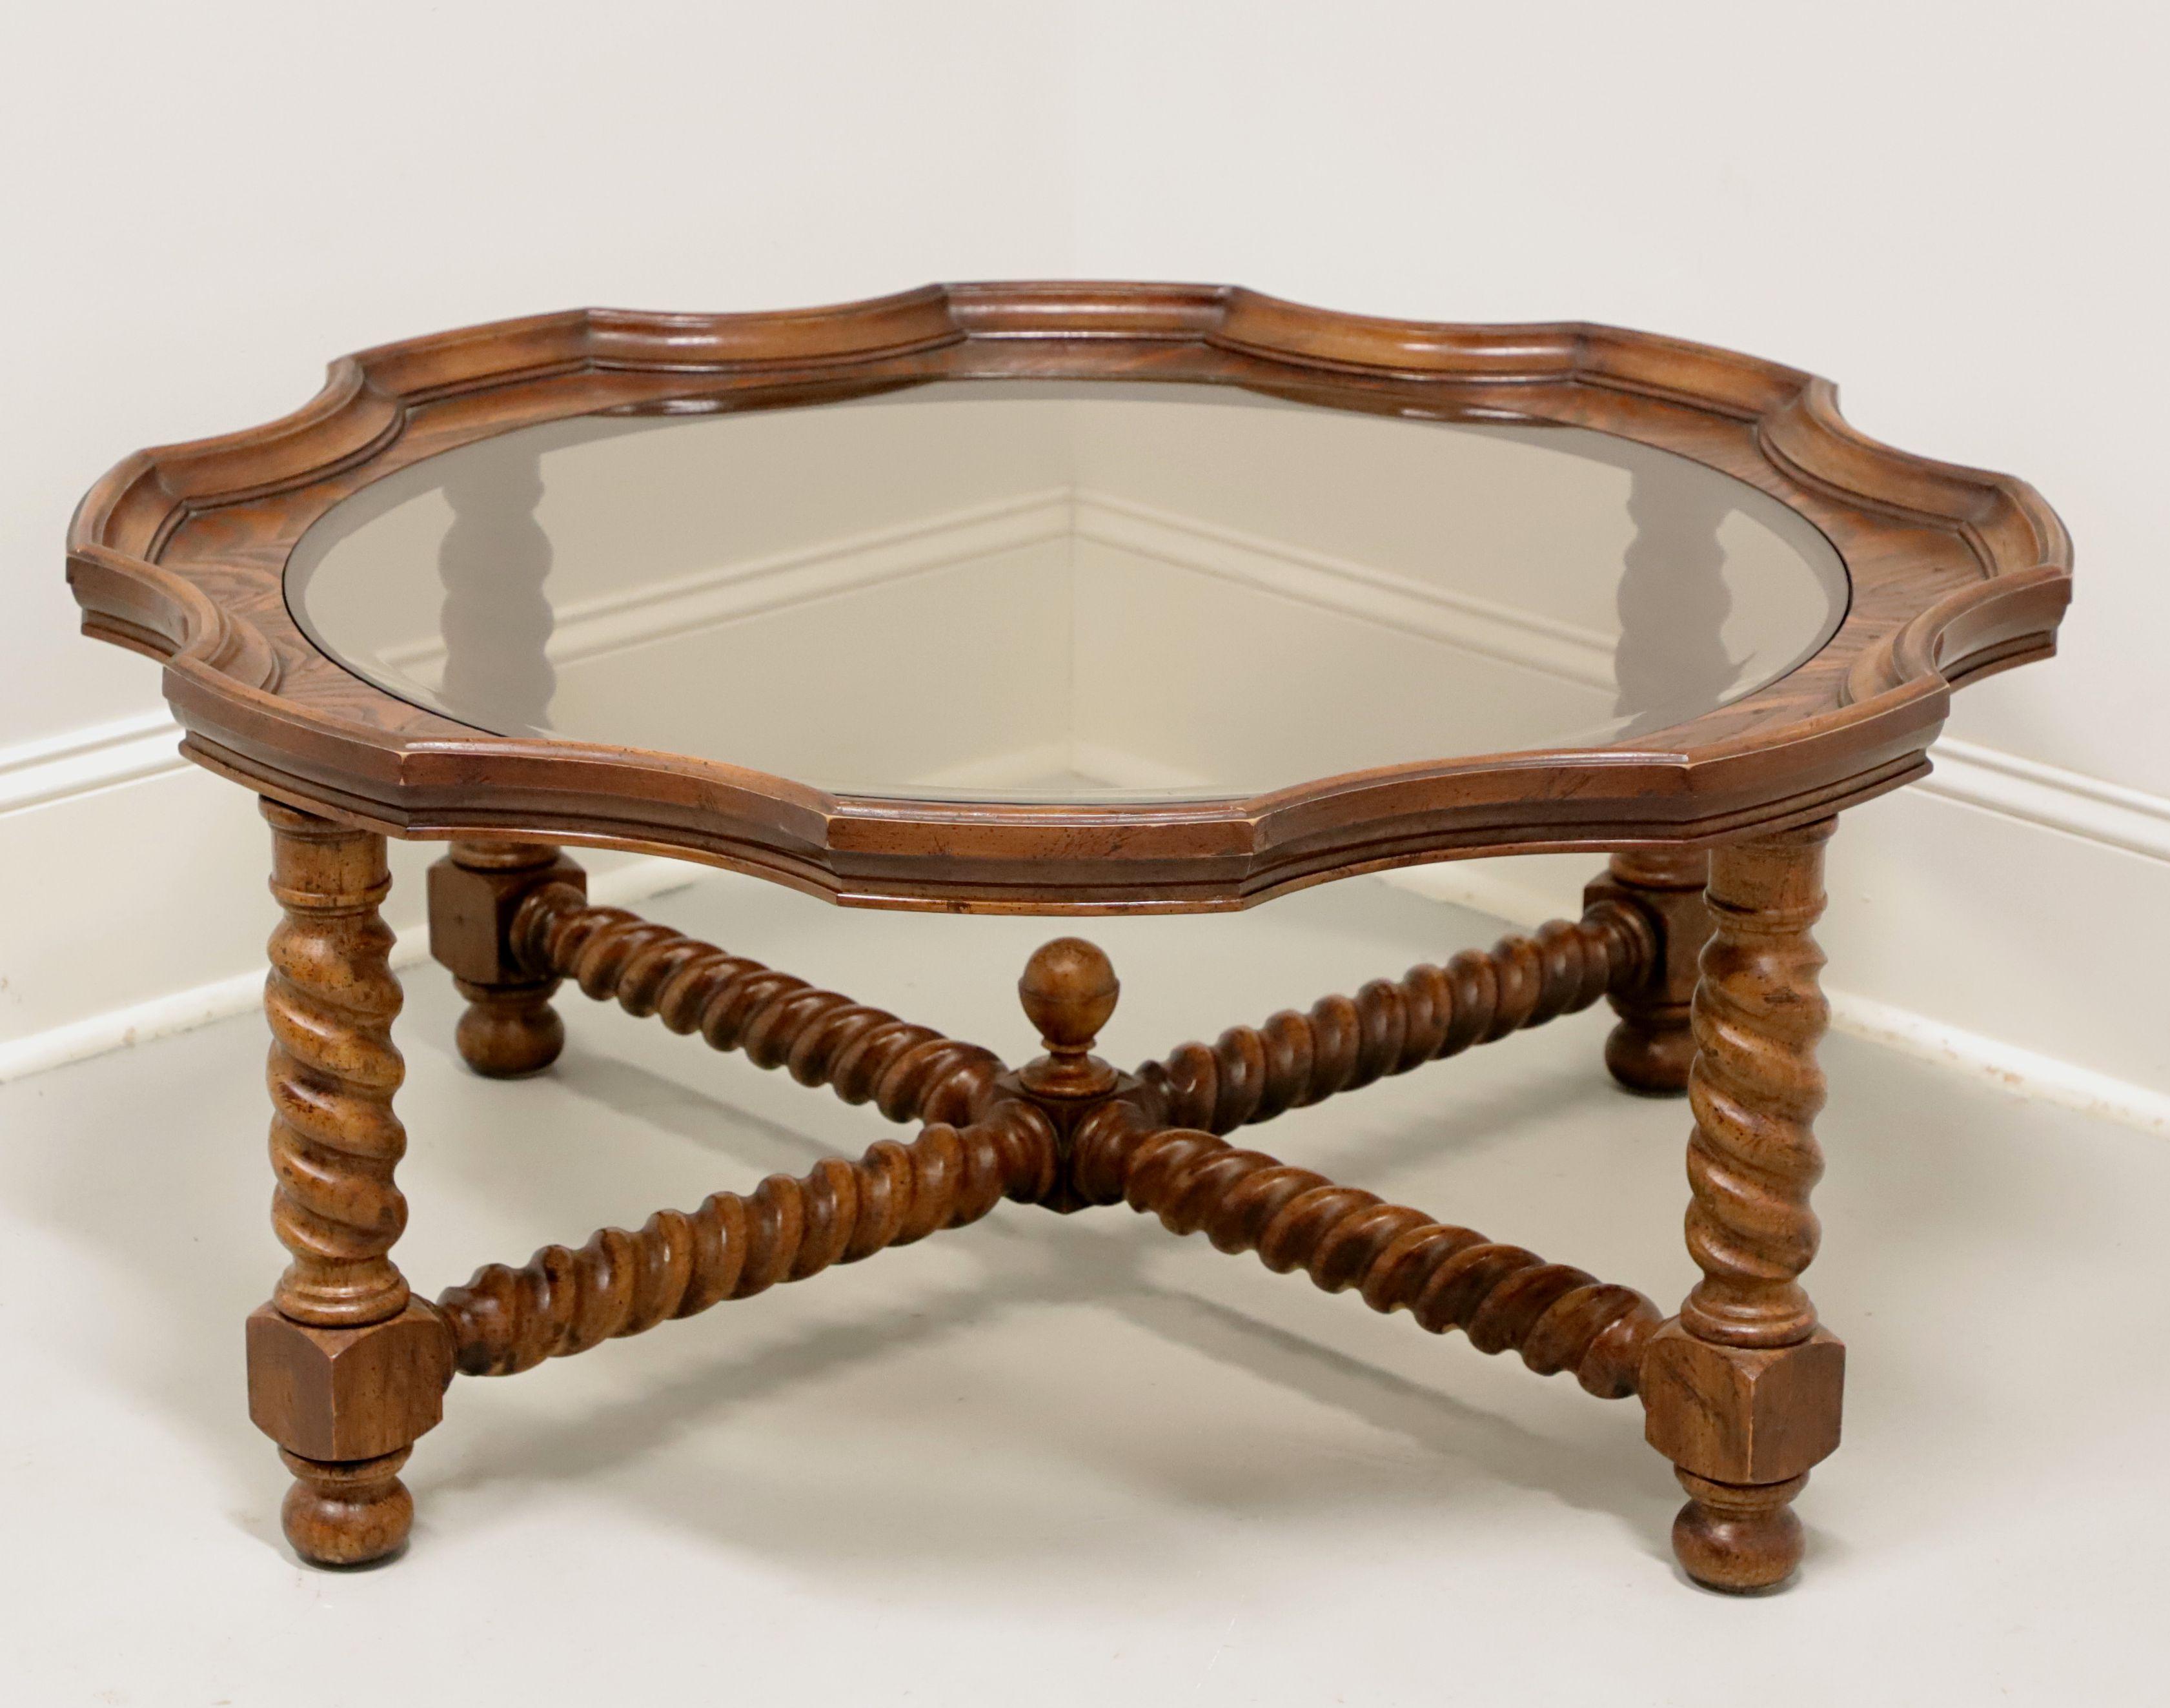 A Jacobean style round glass top coffee table, unbranded, similar in quality to Baker. Solid oak with tiger oak inlay to edge of scalloped top, inset ogee edge smoked glass, “X” shaped barley twist stretcher with center finial, and barley twist legs